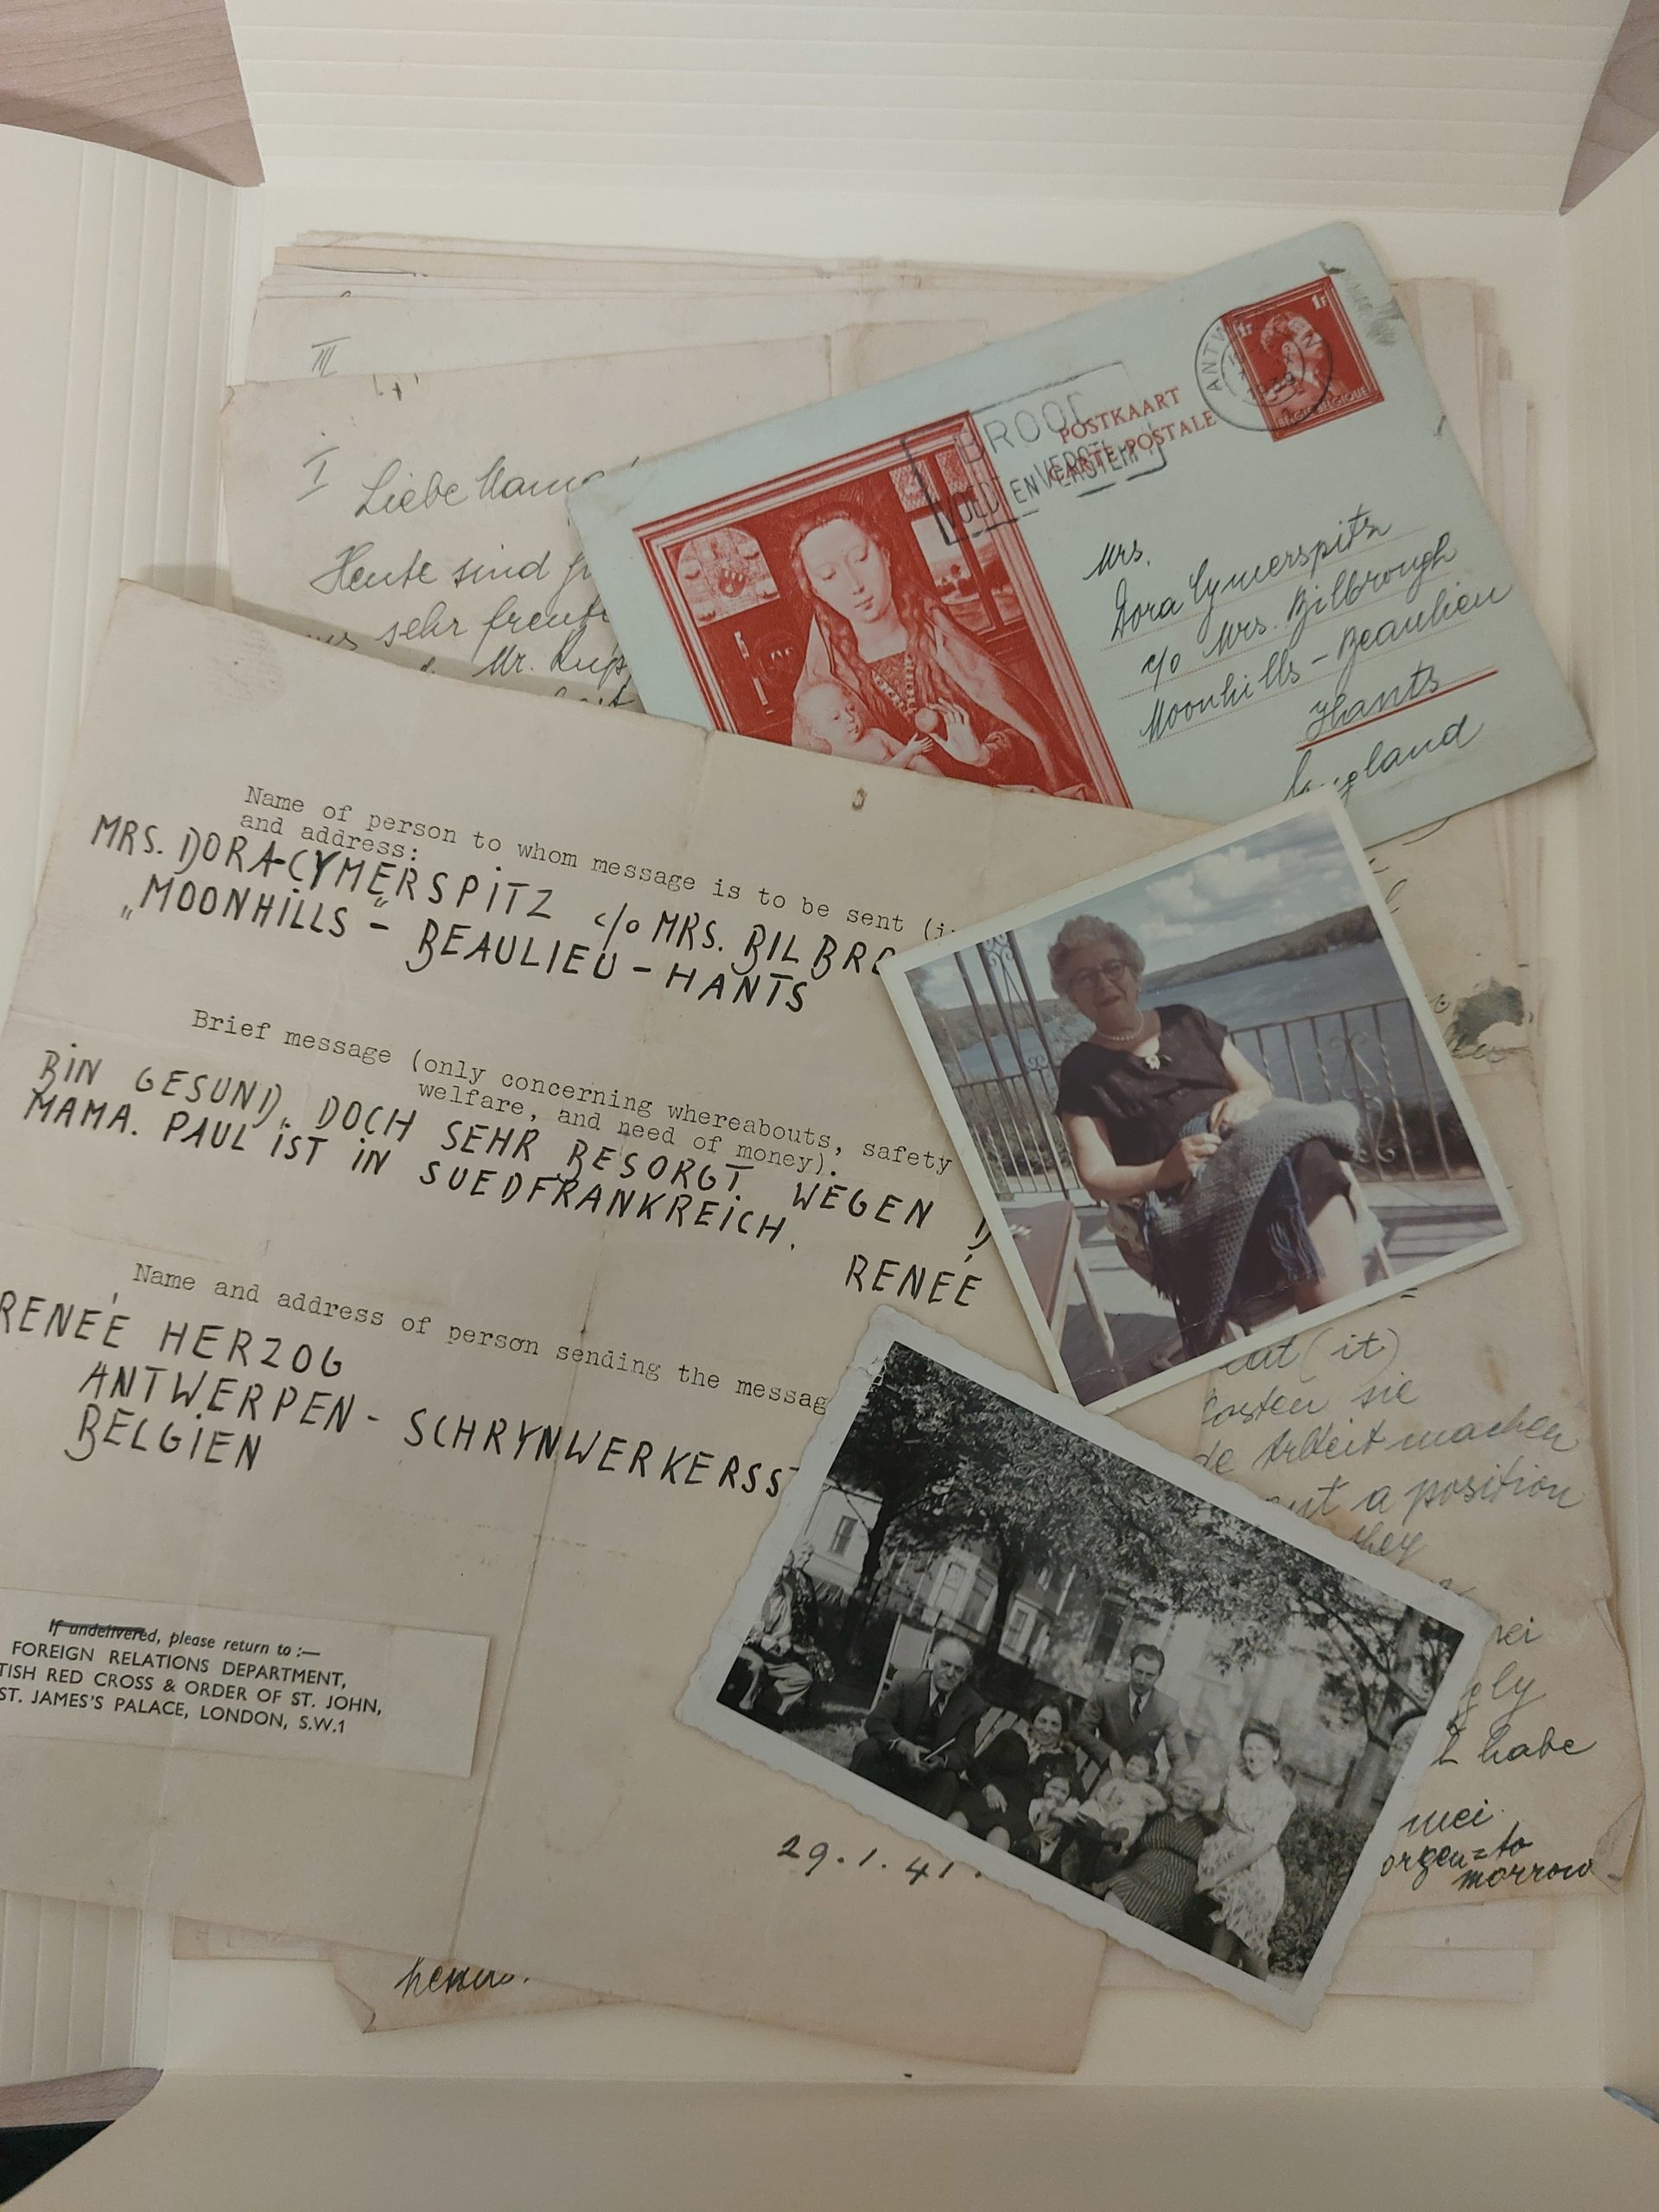 A collection of letters and photos from the Cymer papers